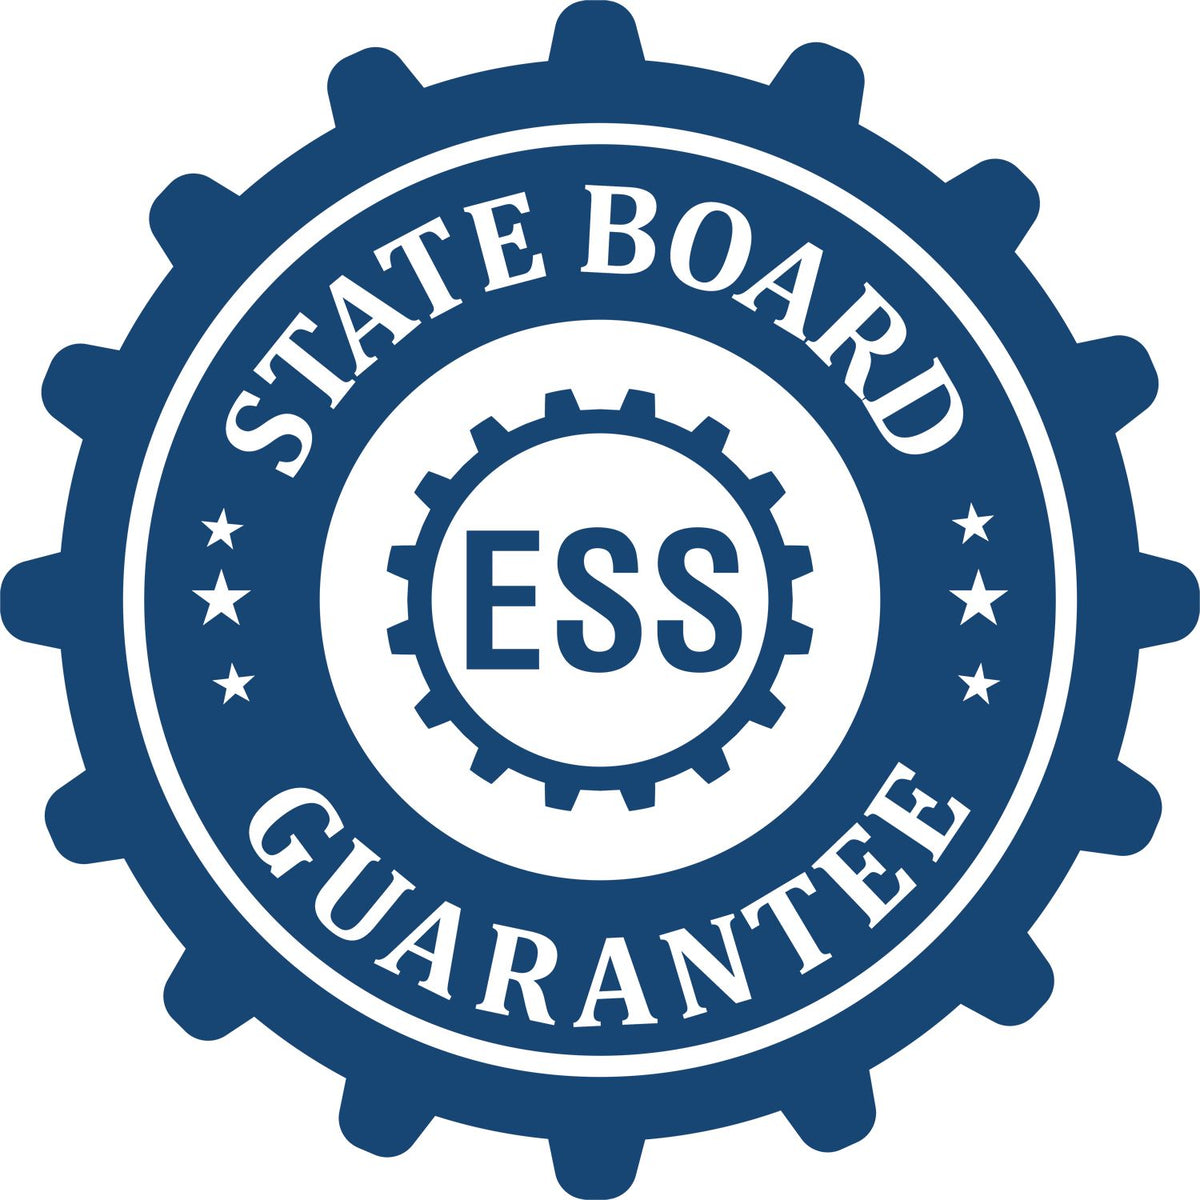 An emblem in a gear shape illustrating a state board guarantee for the State of Mississippi Extended Long Reach Engineer Seal product.